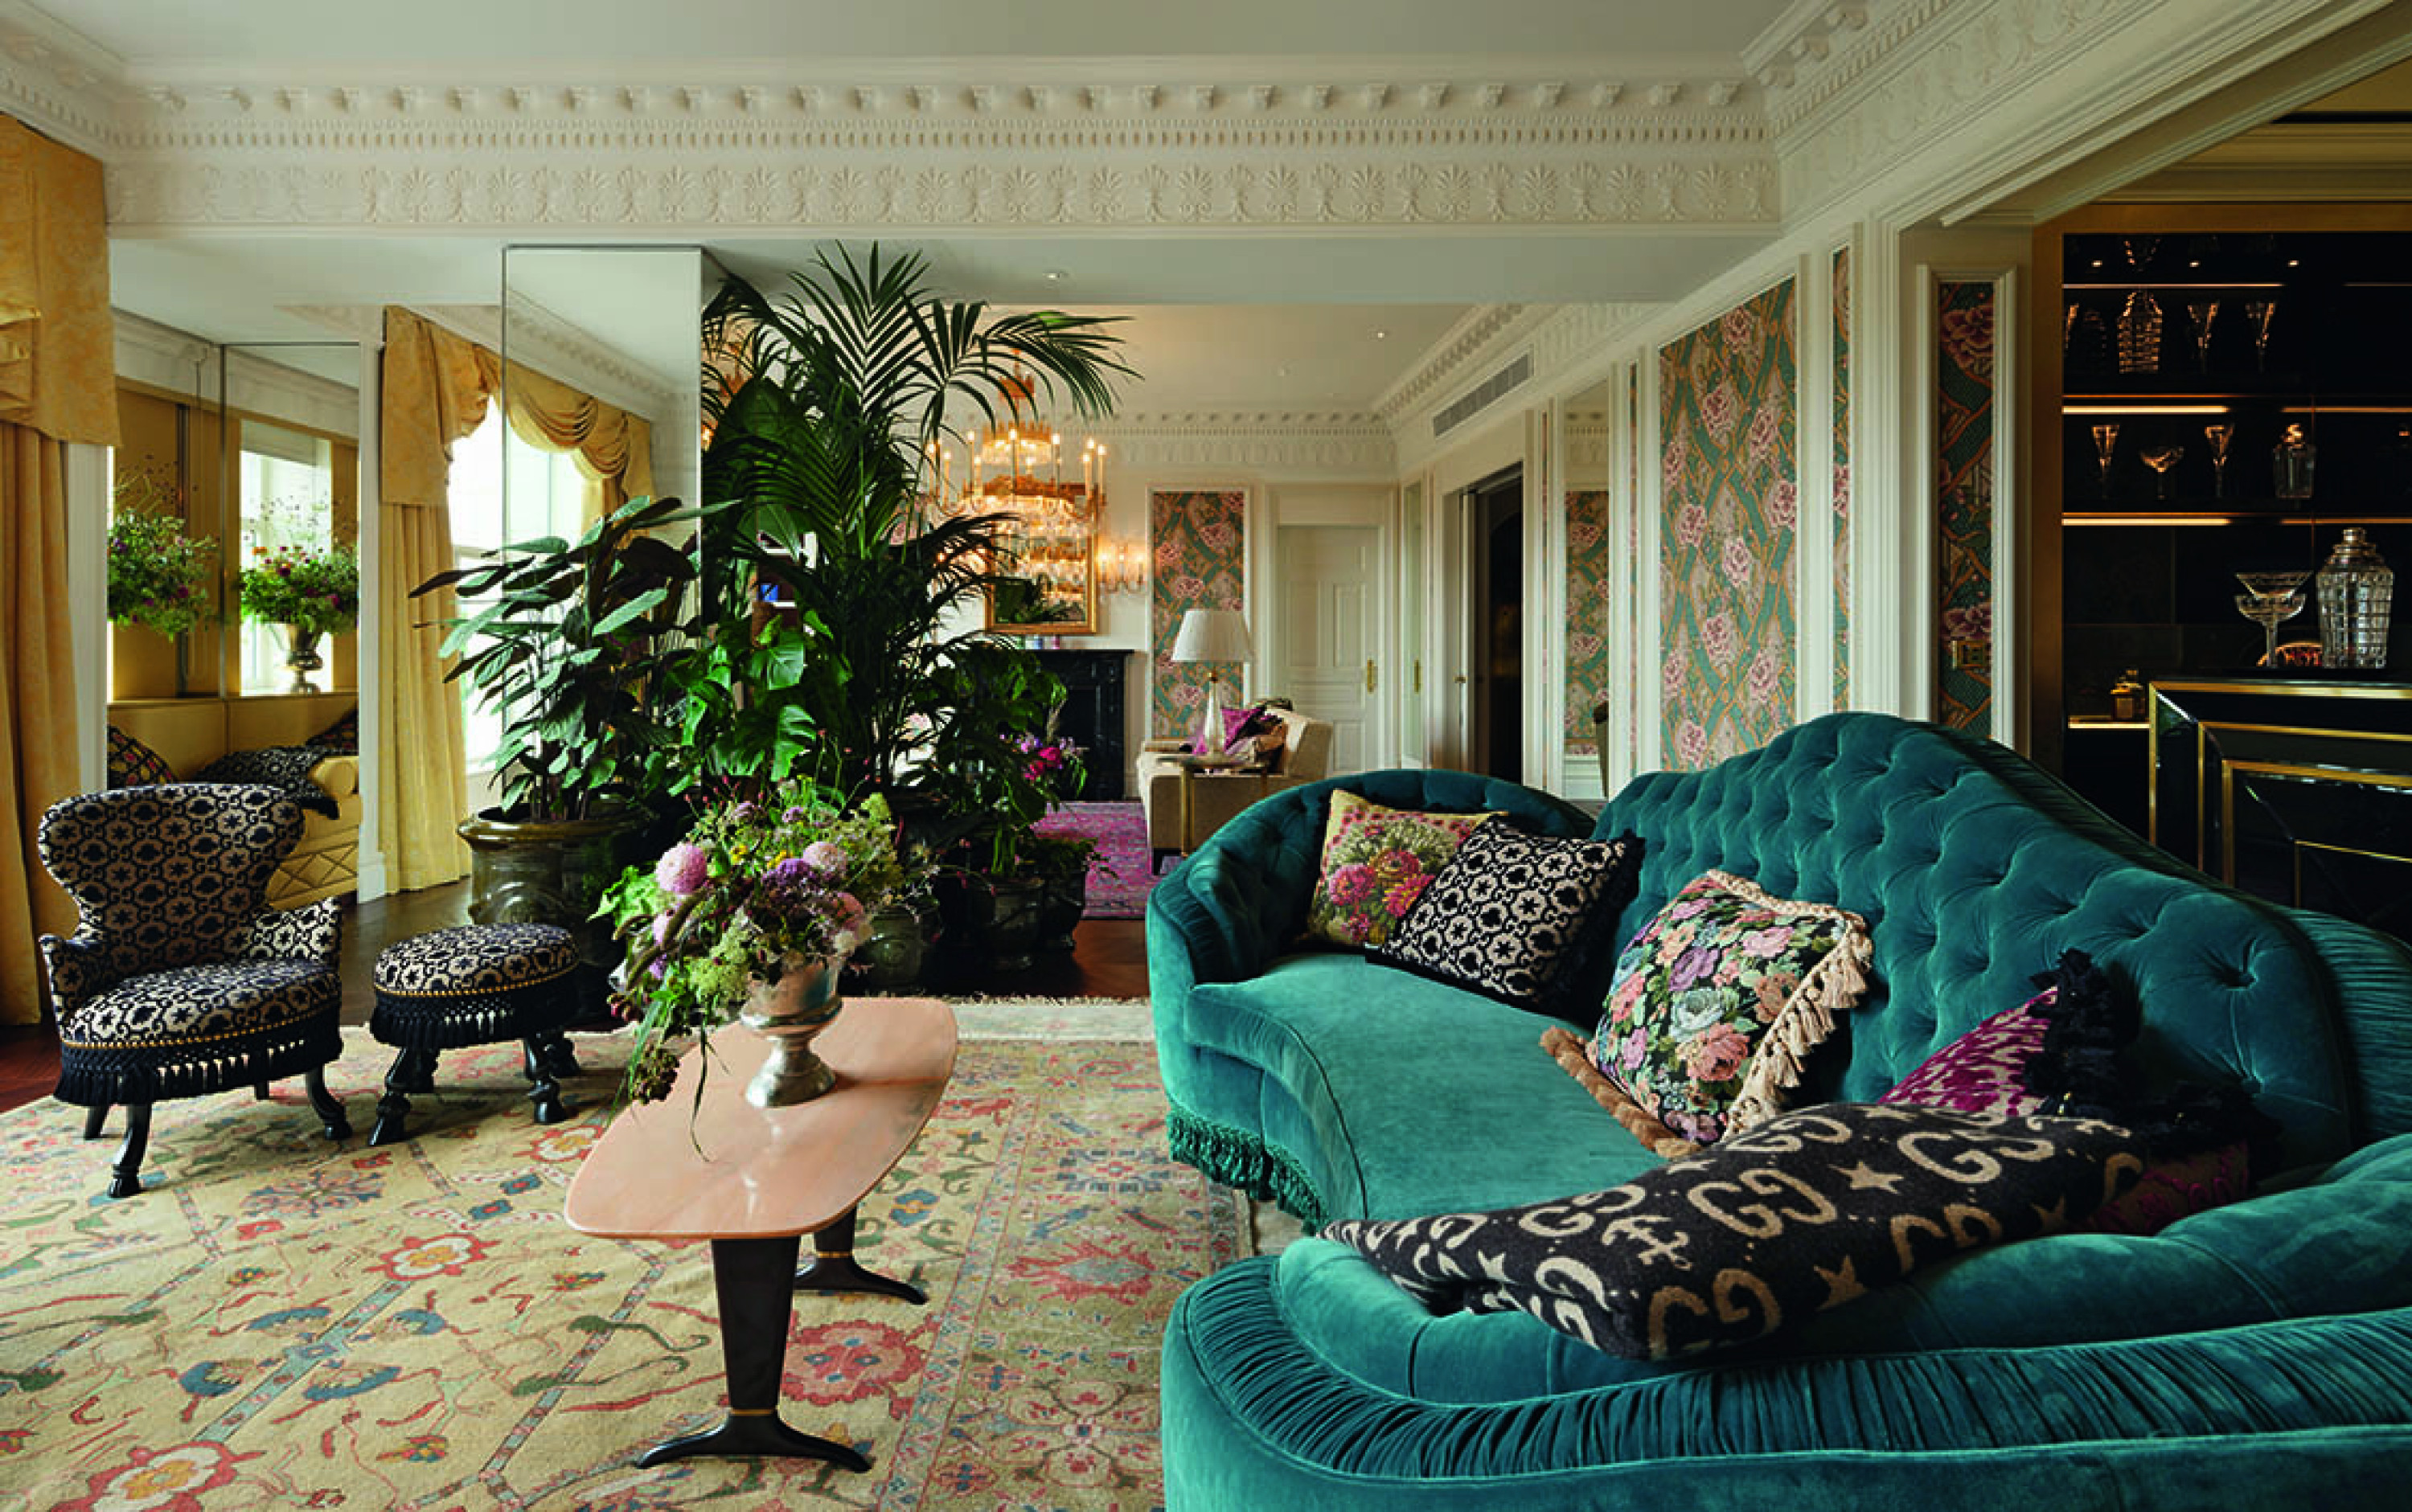 Member News  The luxurious new Gucci Valigeria opens at The Savoy